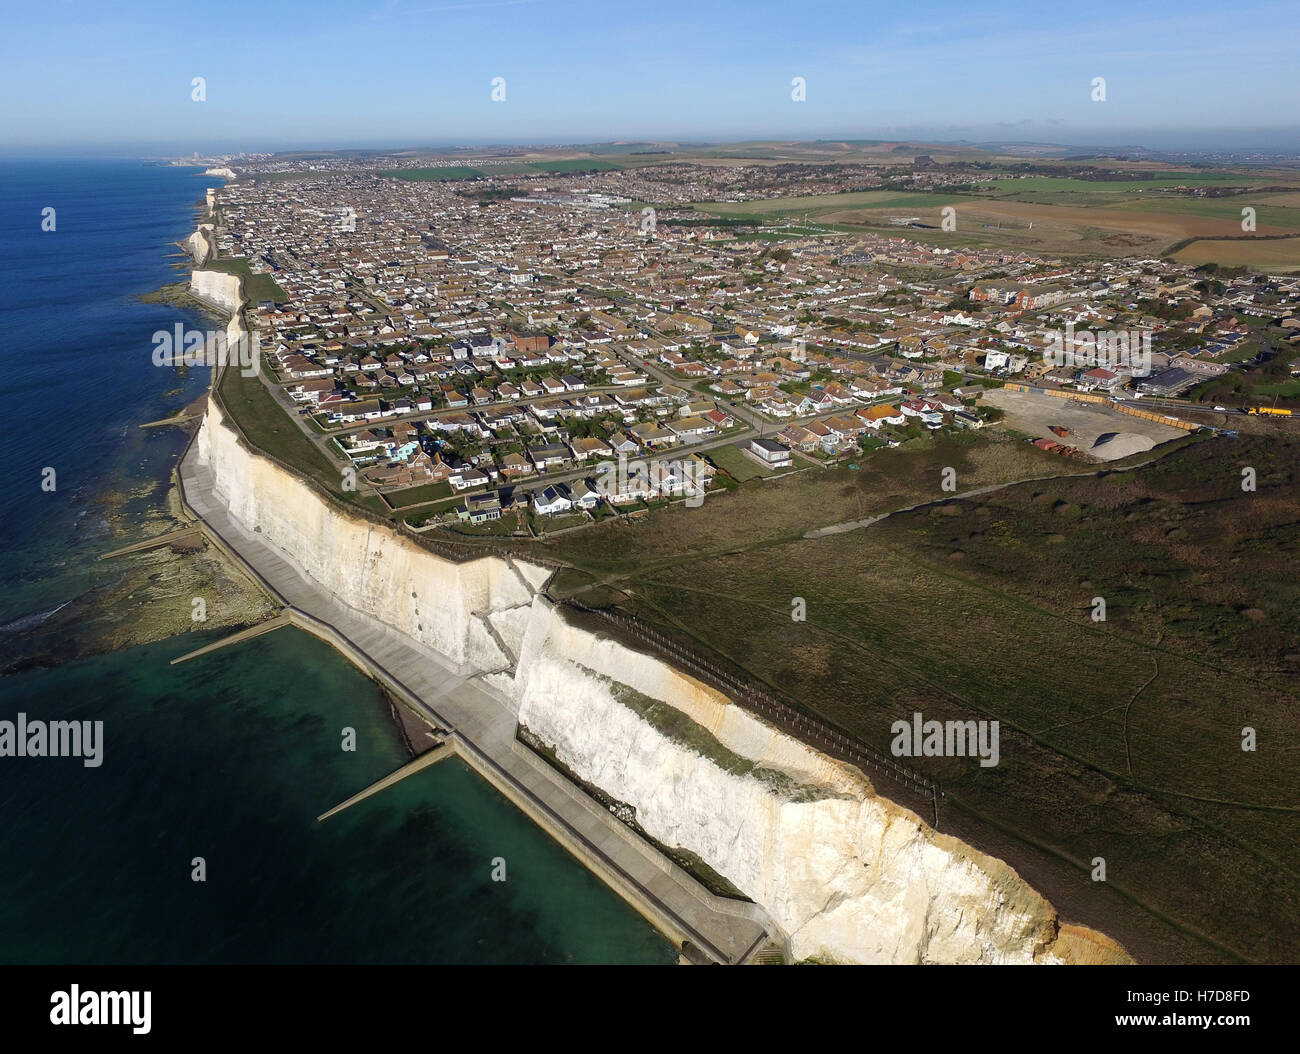 Aerial view of Peacehaven, East Sussex, a small seaside town perched on top of chalk cliffs near the South Downs National Park Stock Photo